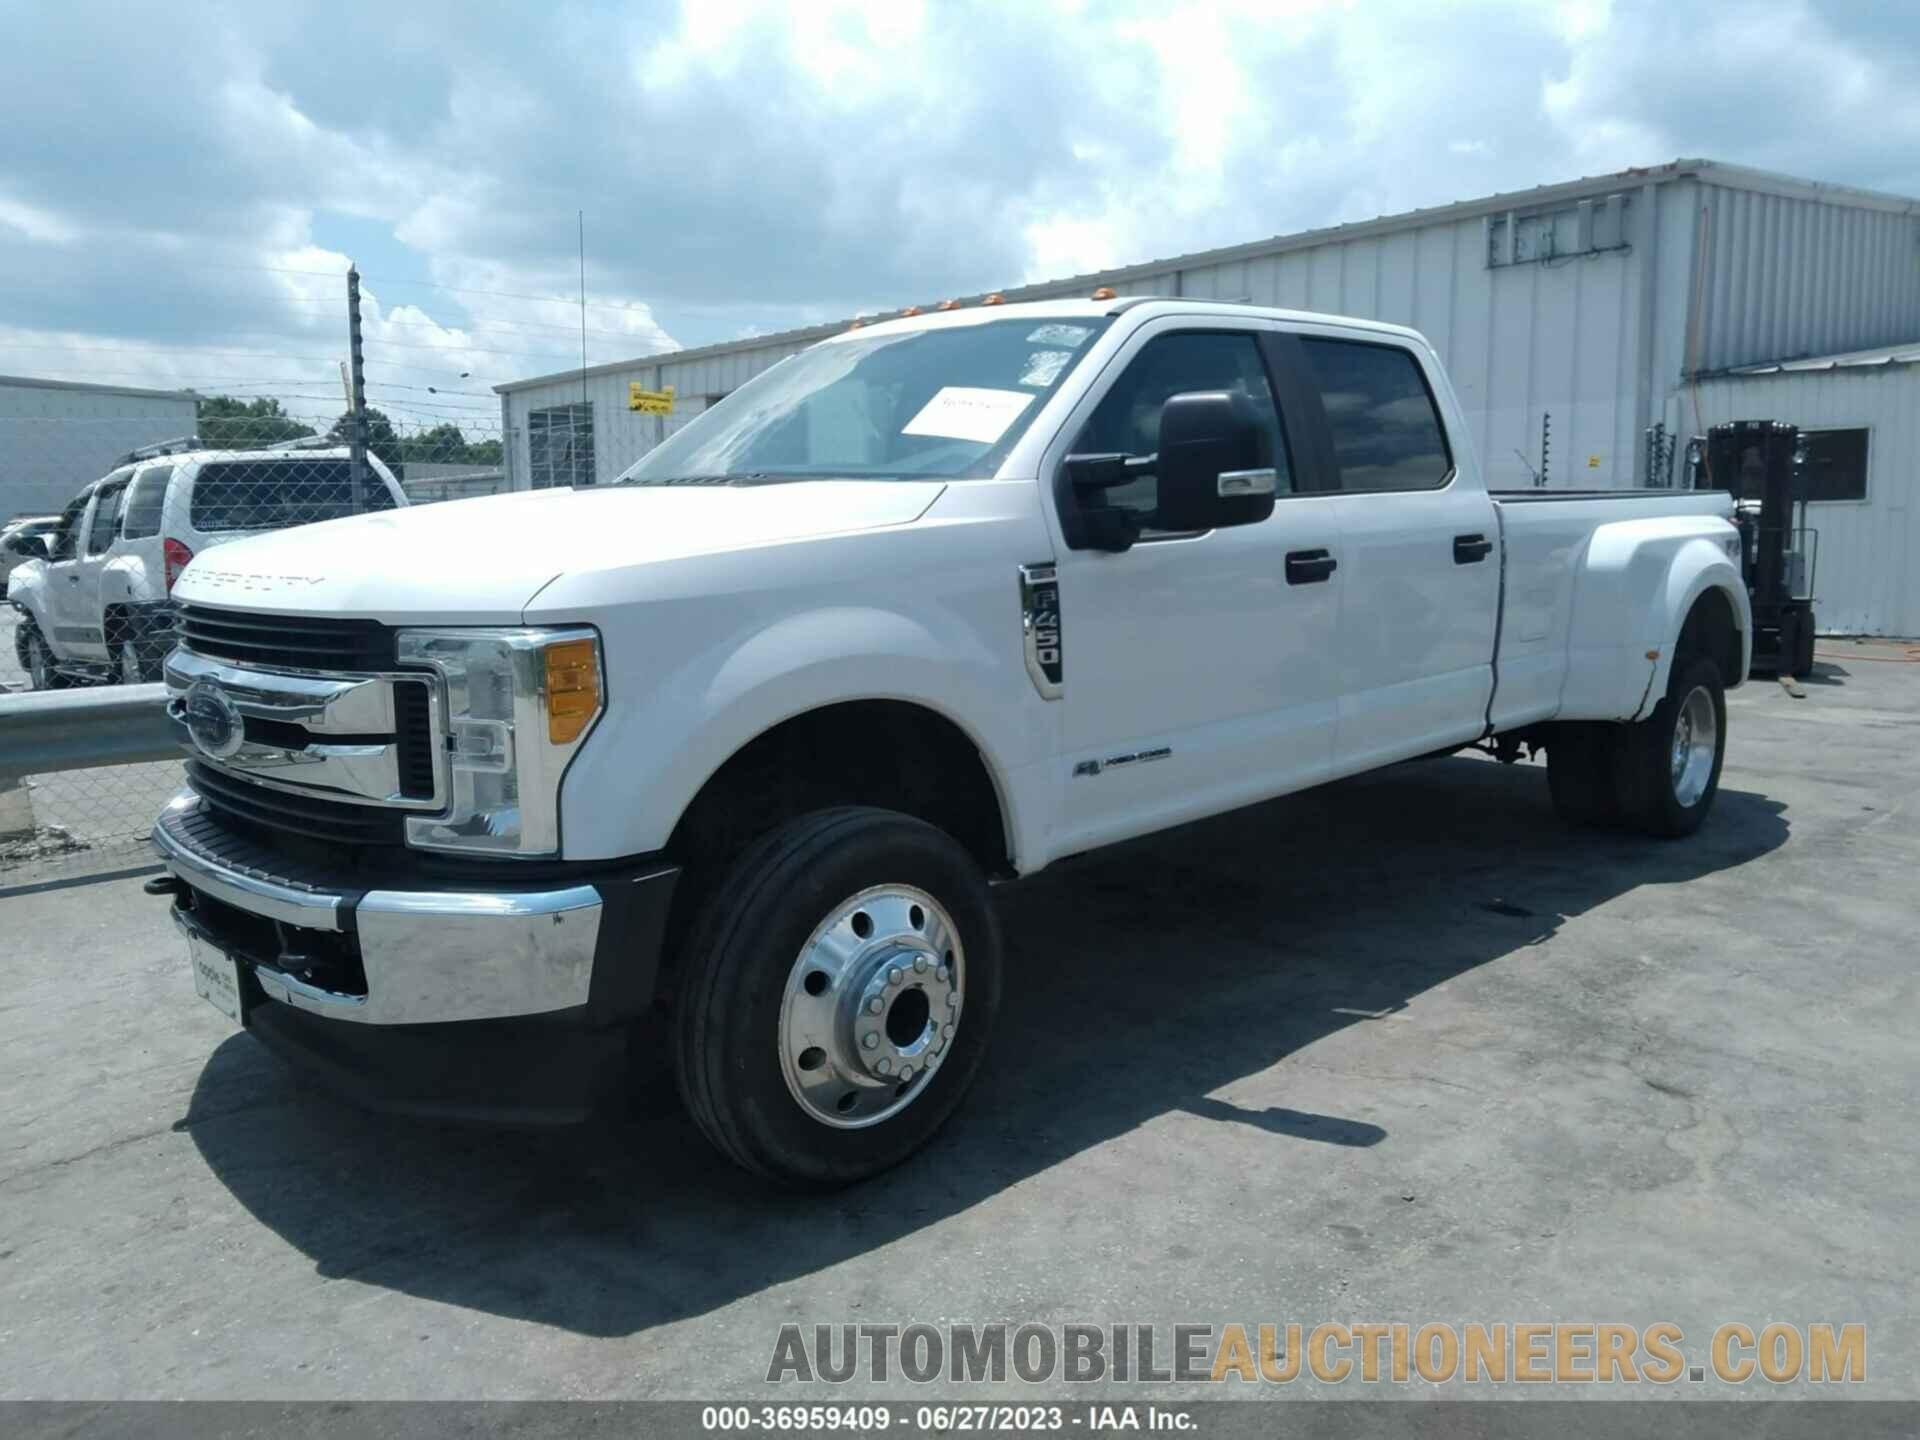 1FT8W4DT1JEC86104 FORD SUPER DUTY F-450 DRW 2018